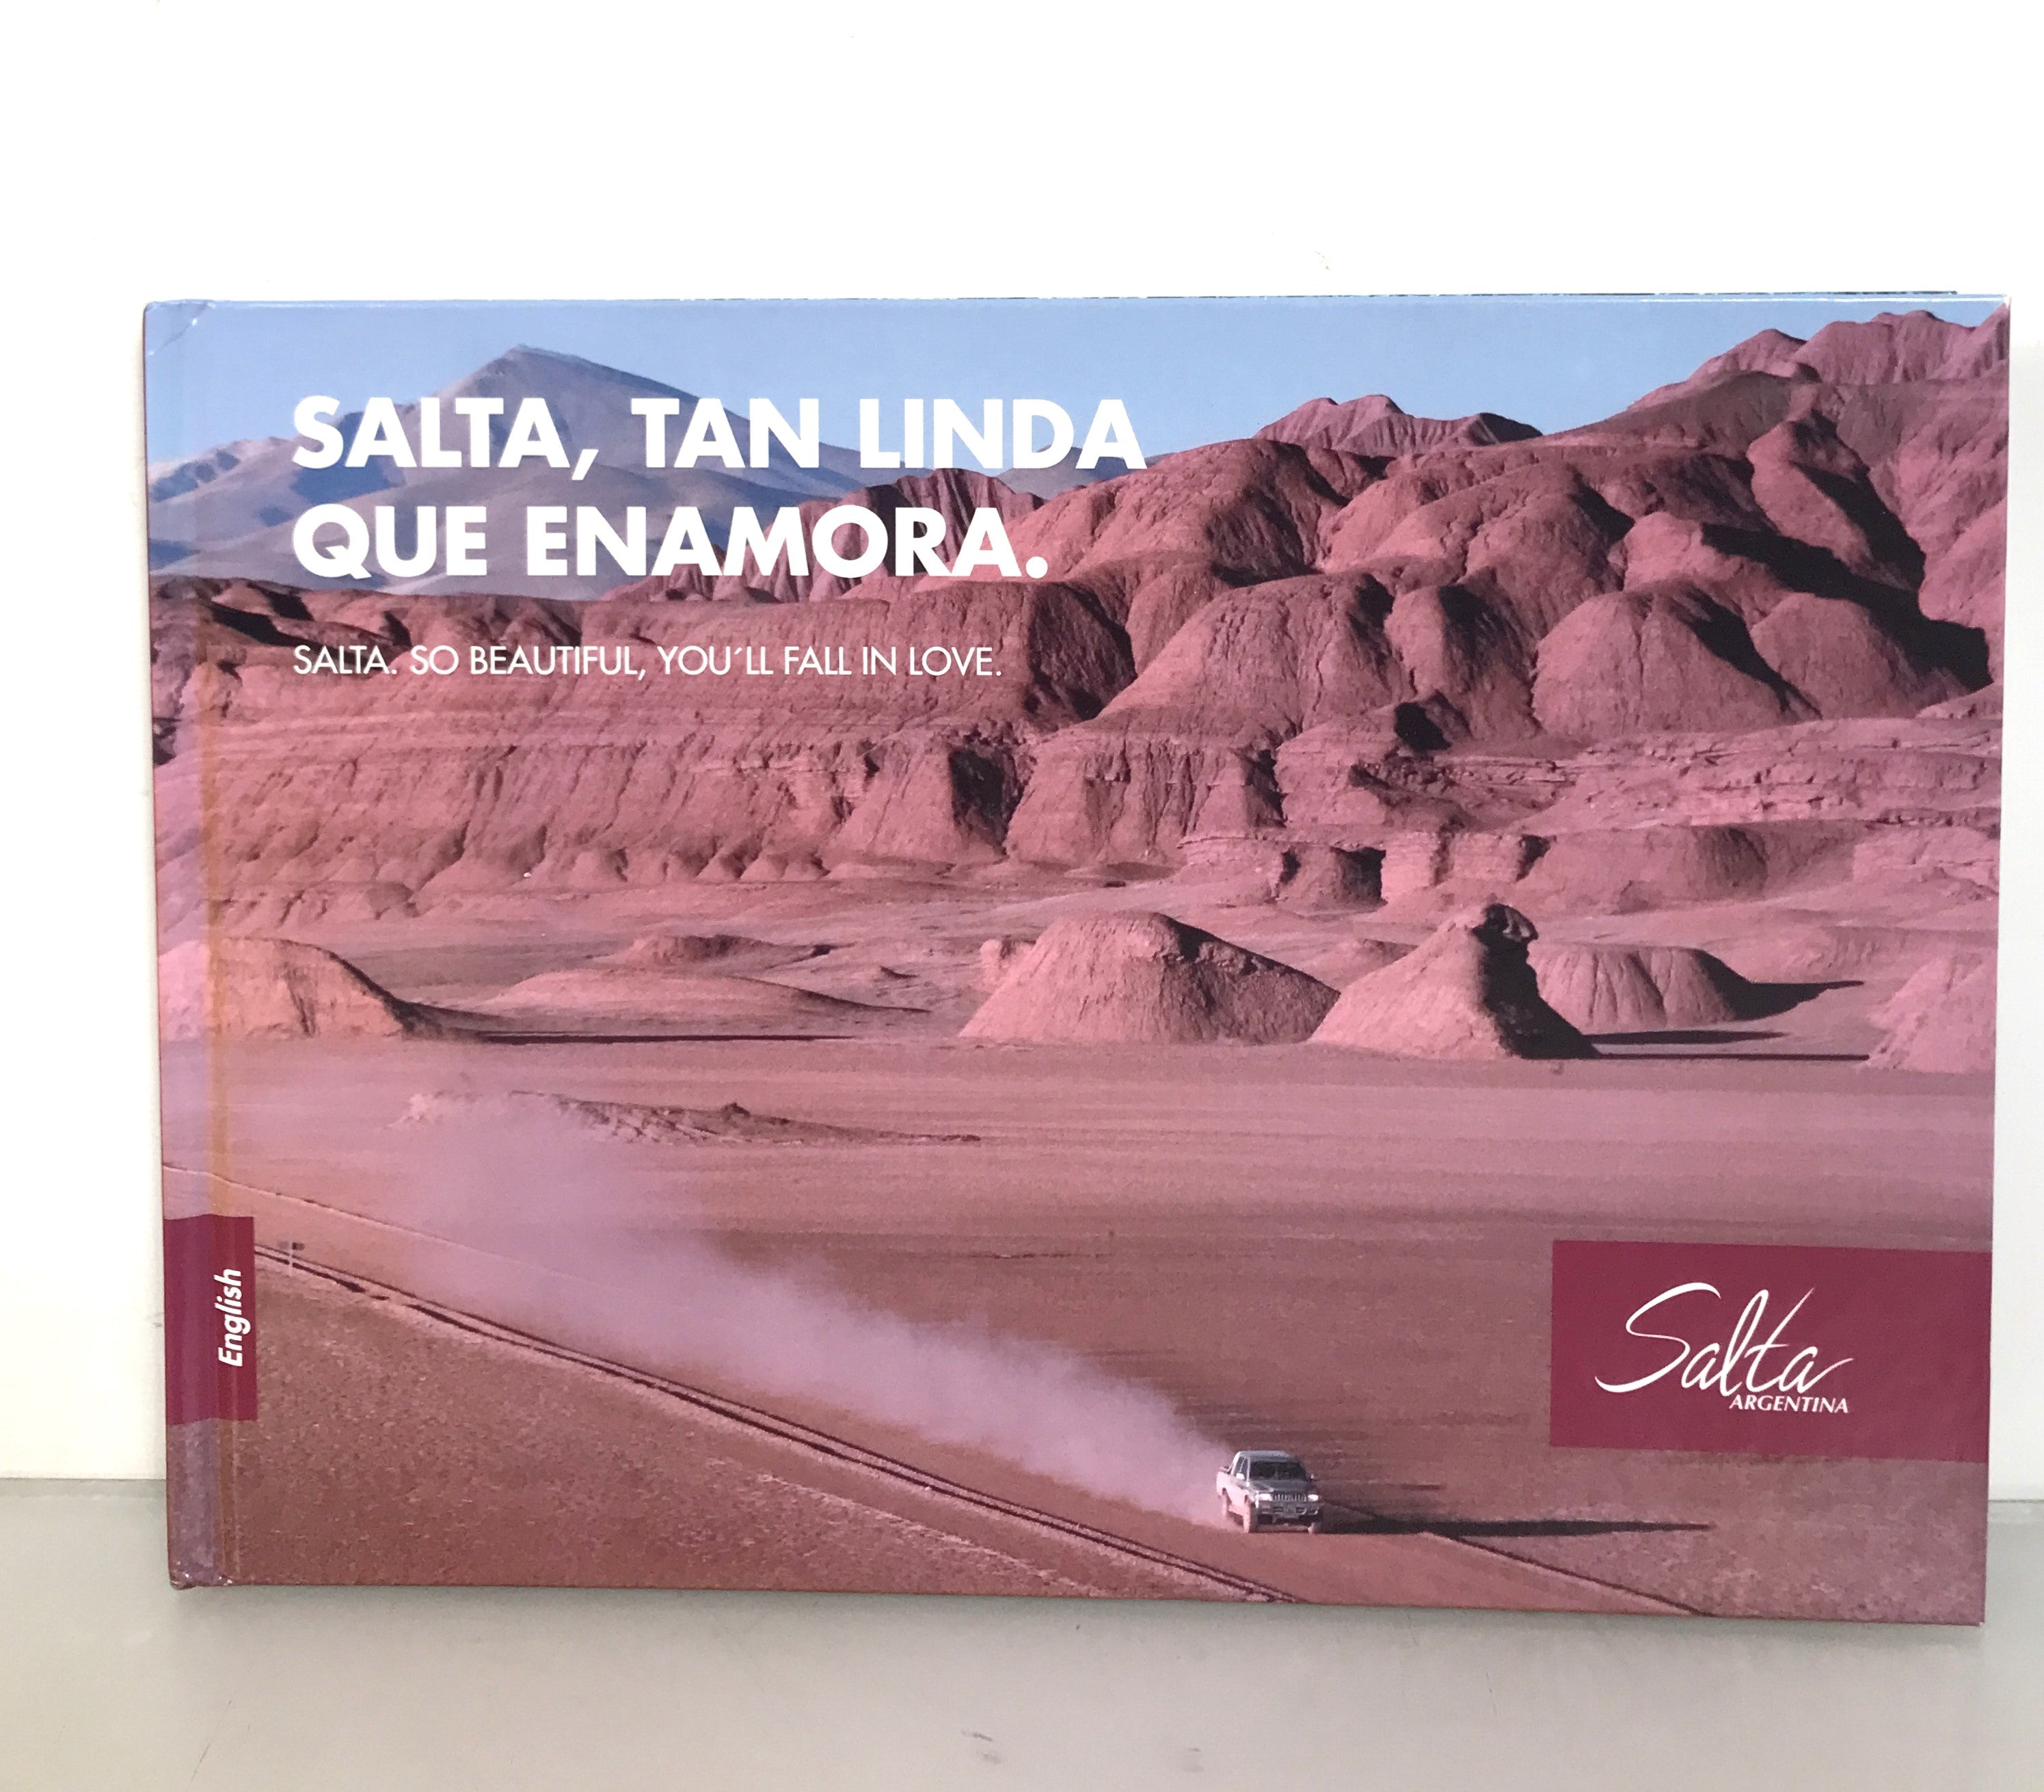 Salta, Argentina "So Beautiful, You'll Fall in Love" Tourism Book HC